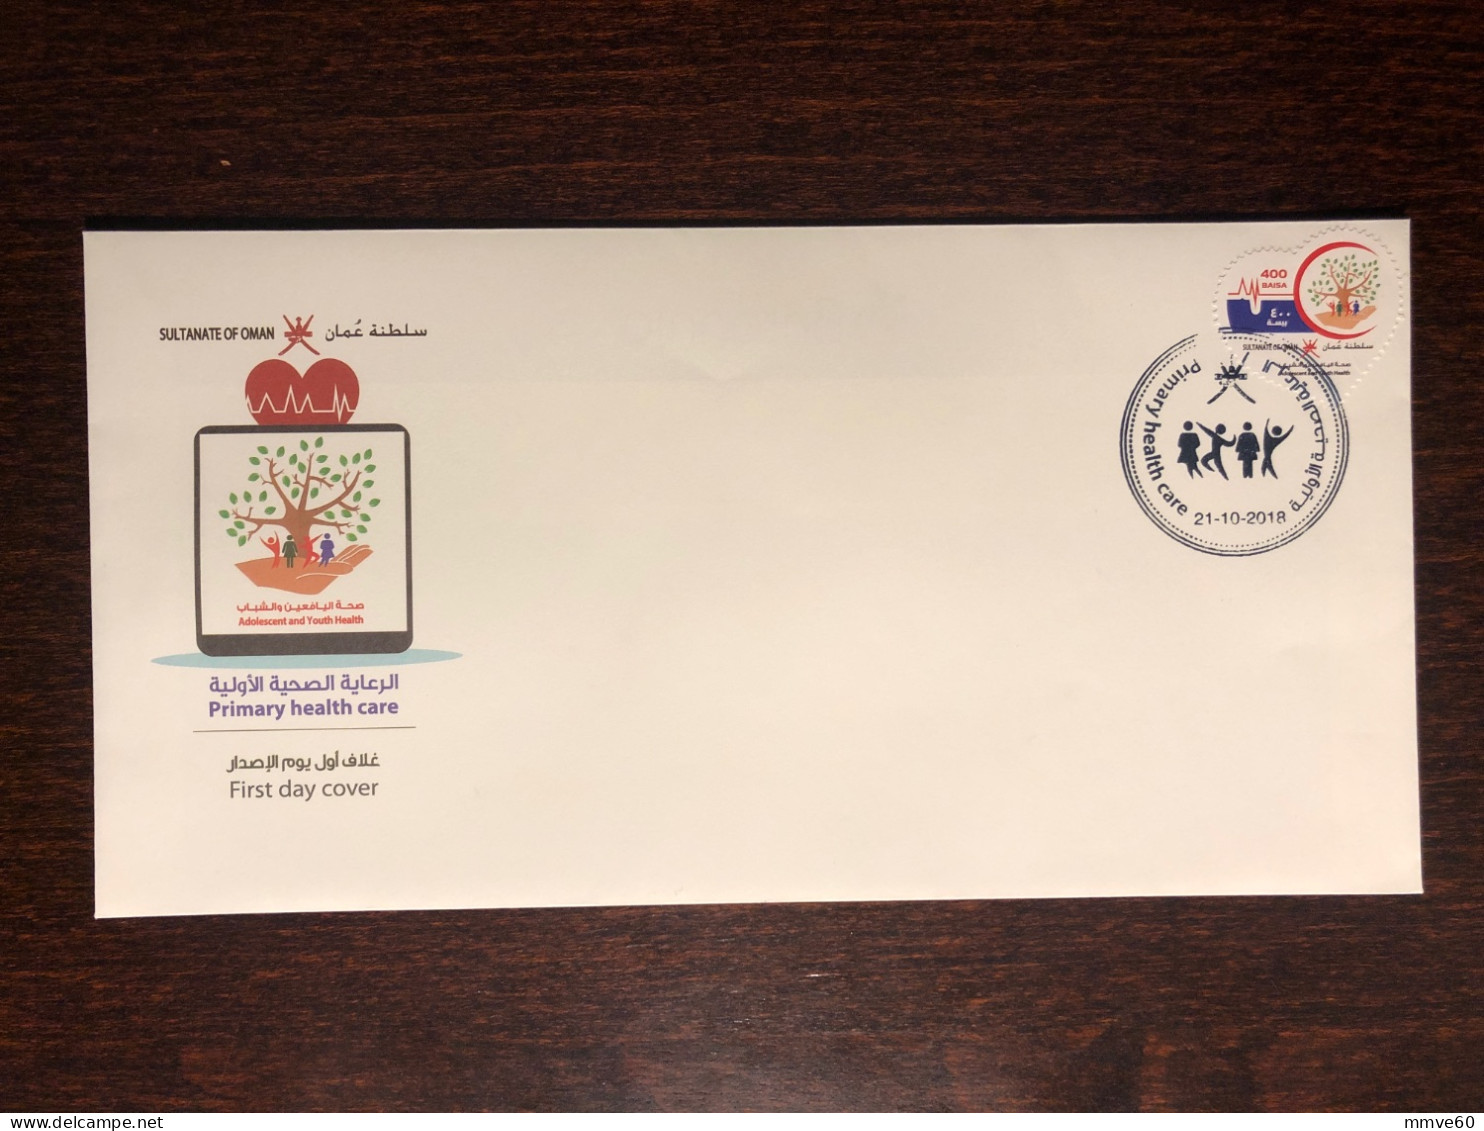 OMAN FDC COVER 2018 YEAR PRIMARY HEALTH CARE HEALTH MEDICINE STAMPS - Omán